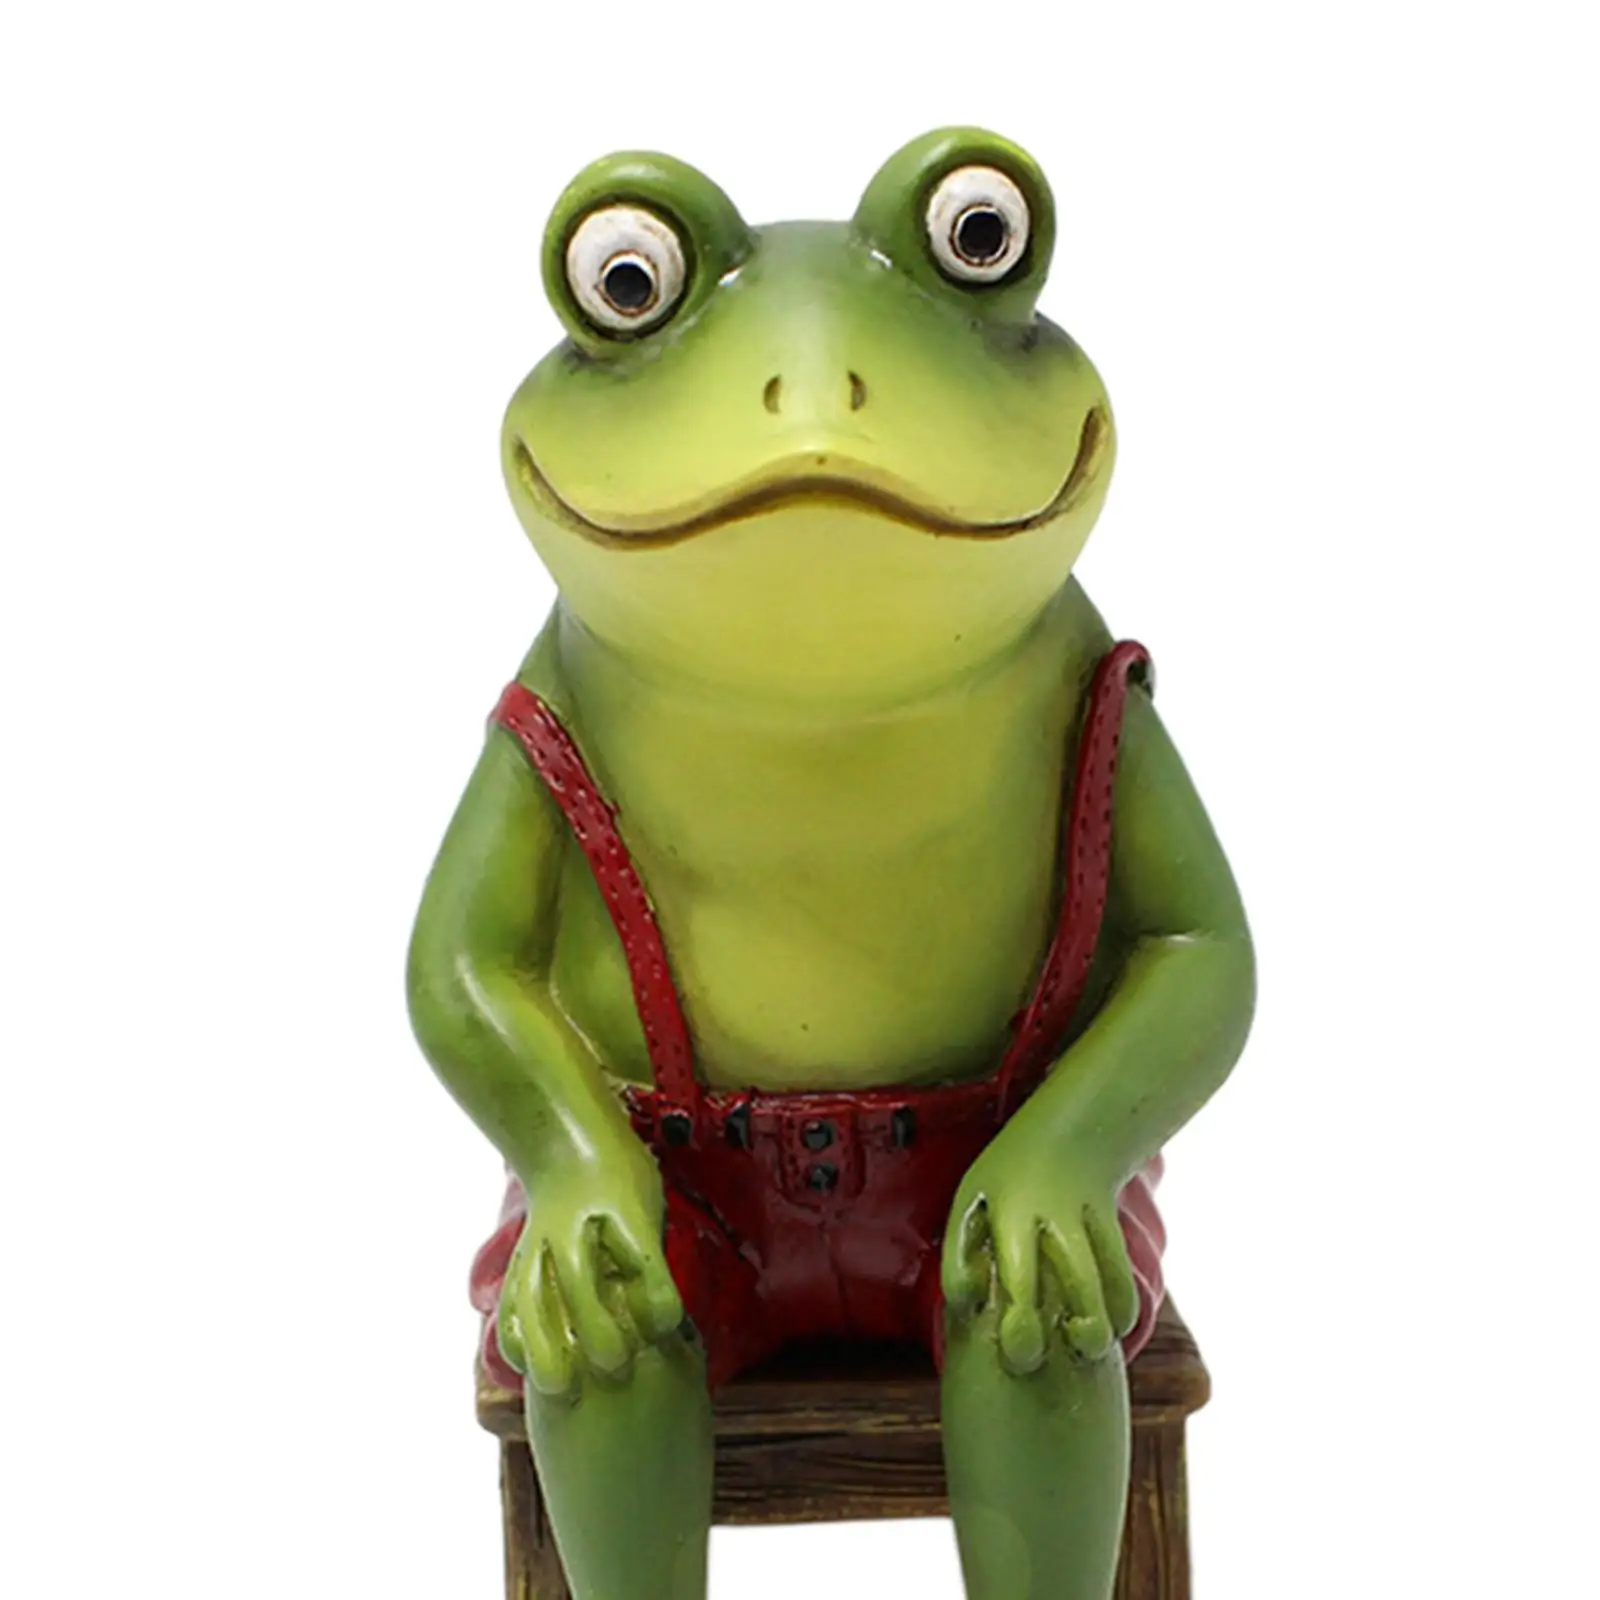 Creative Frog Figurine Collectible Statue,Resin Sculpture Craft Model,Garden Office Home Dining Room Decor